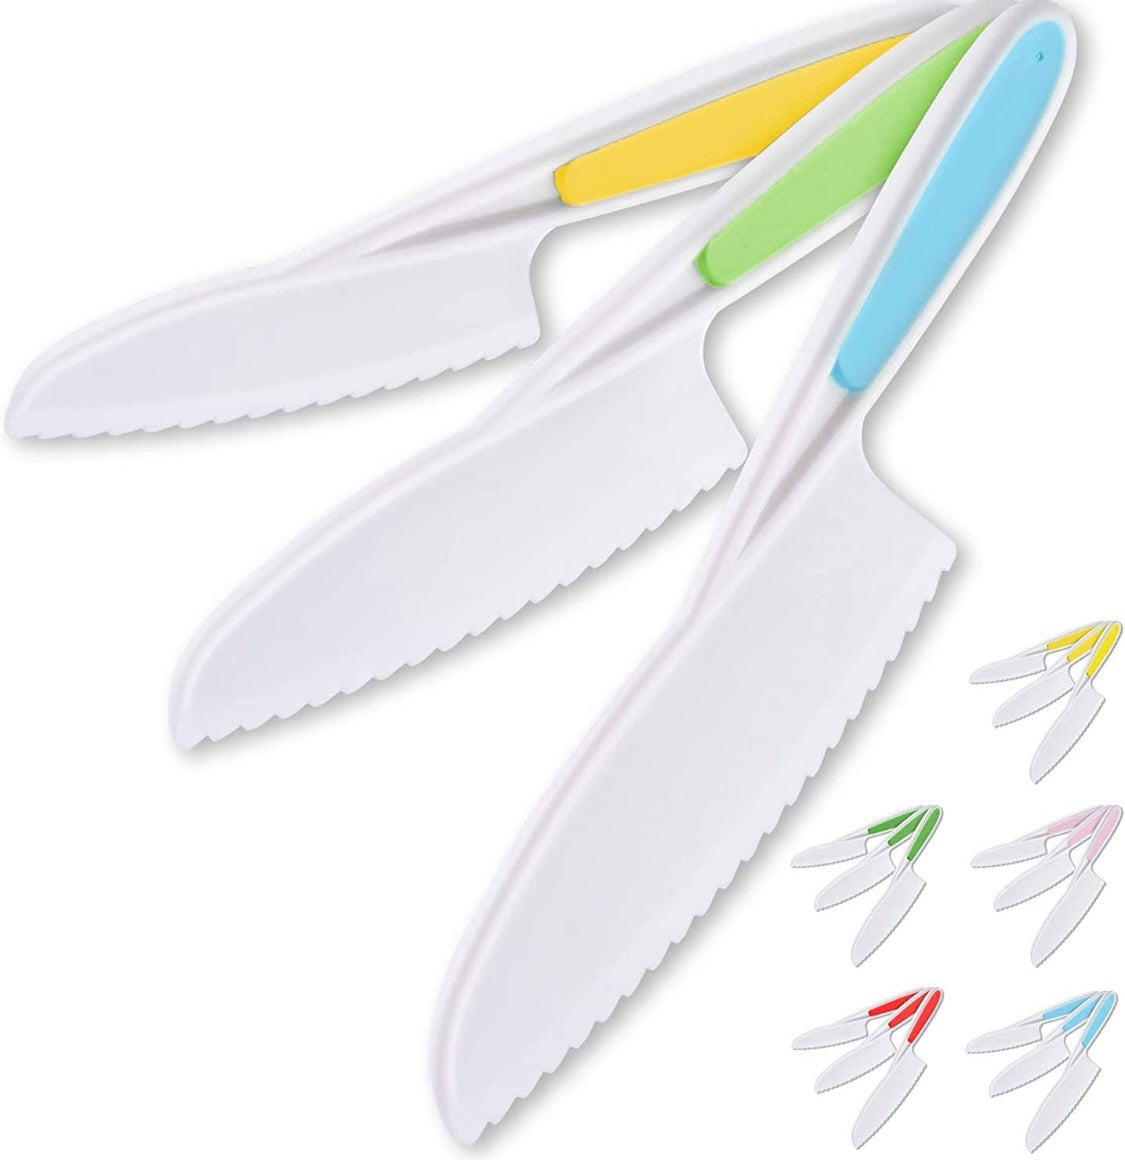 Whis-Kid: Kids Knife Set for Cooking and Cutting